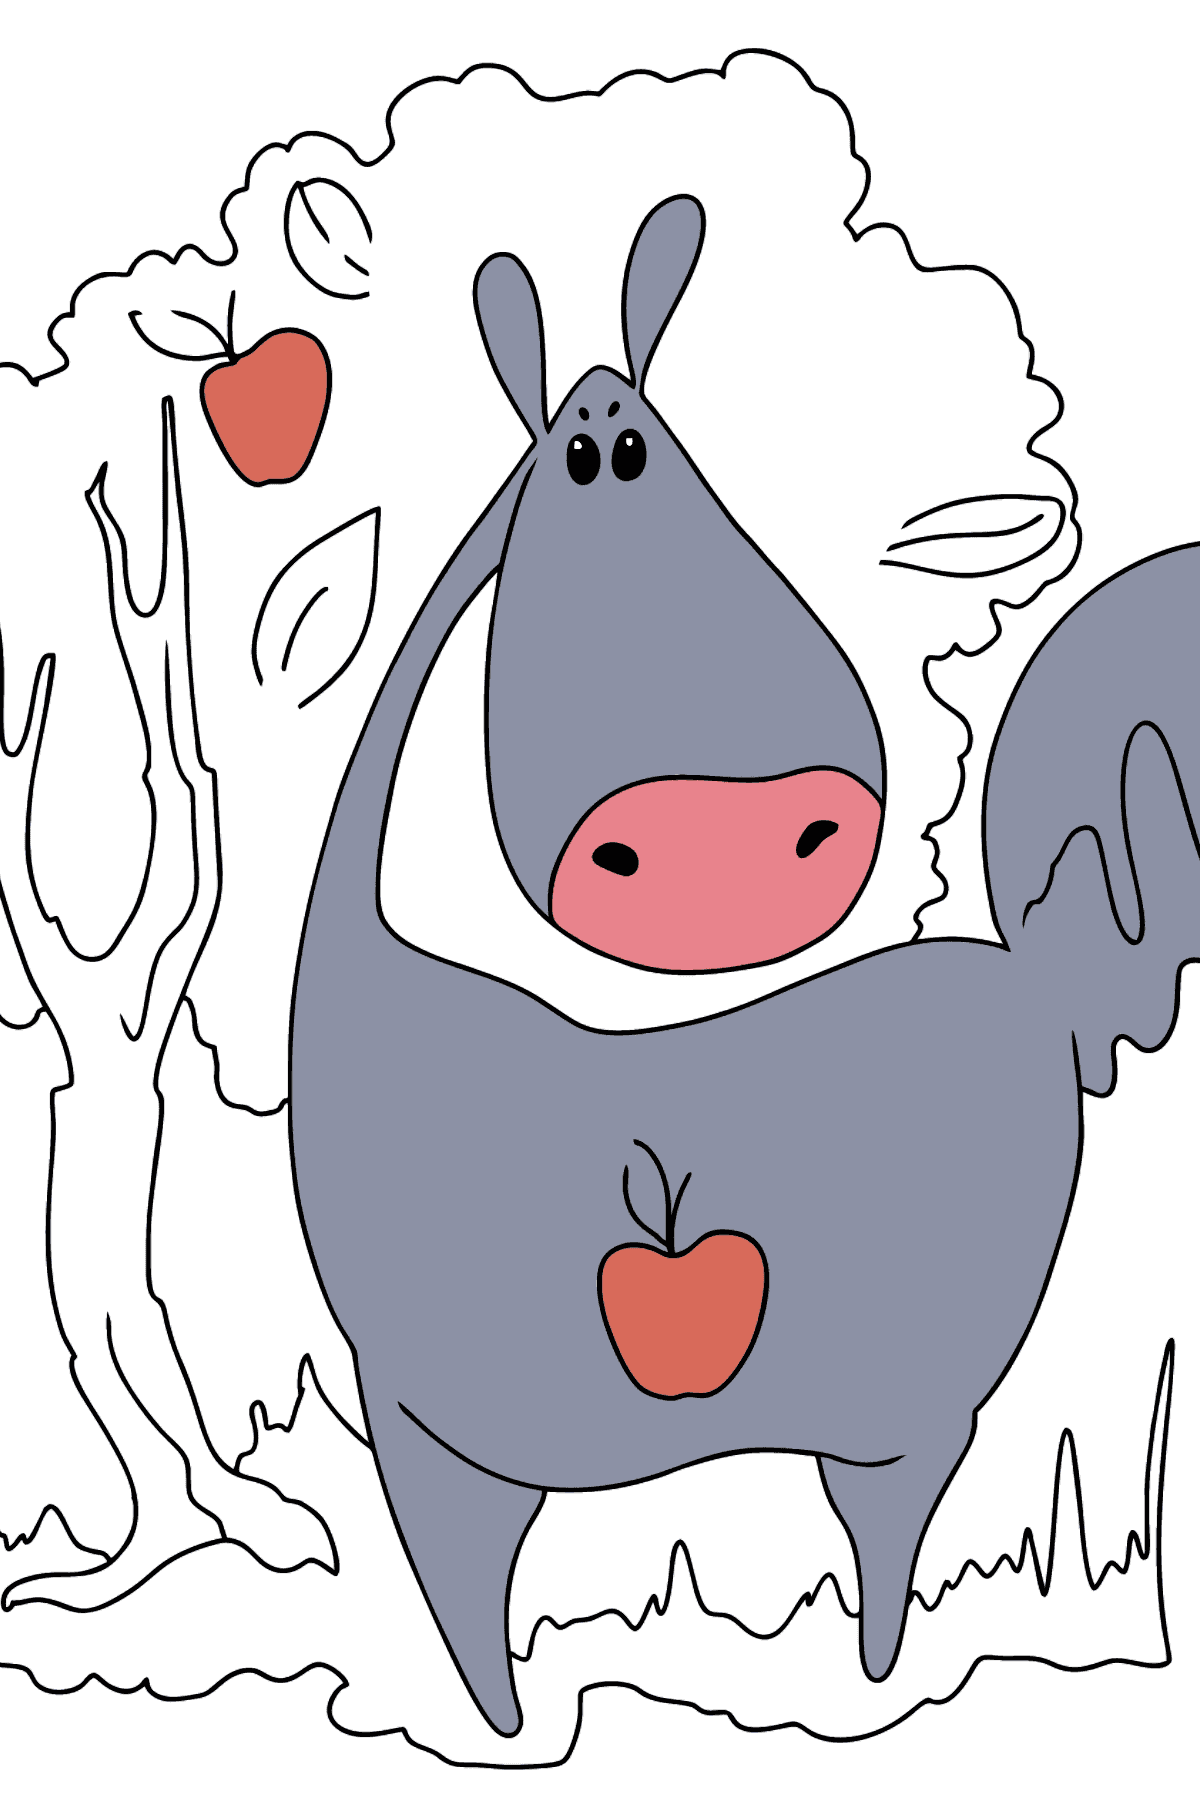 Simple coloring page a horse with apples - Coloring Pages for Kids